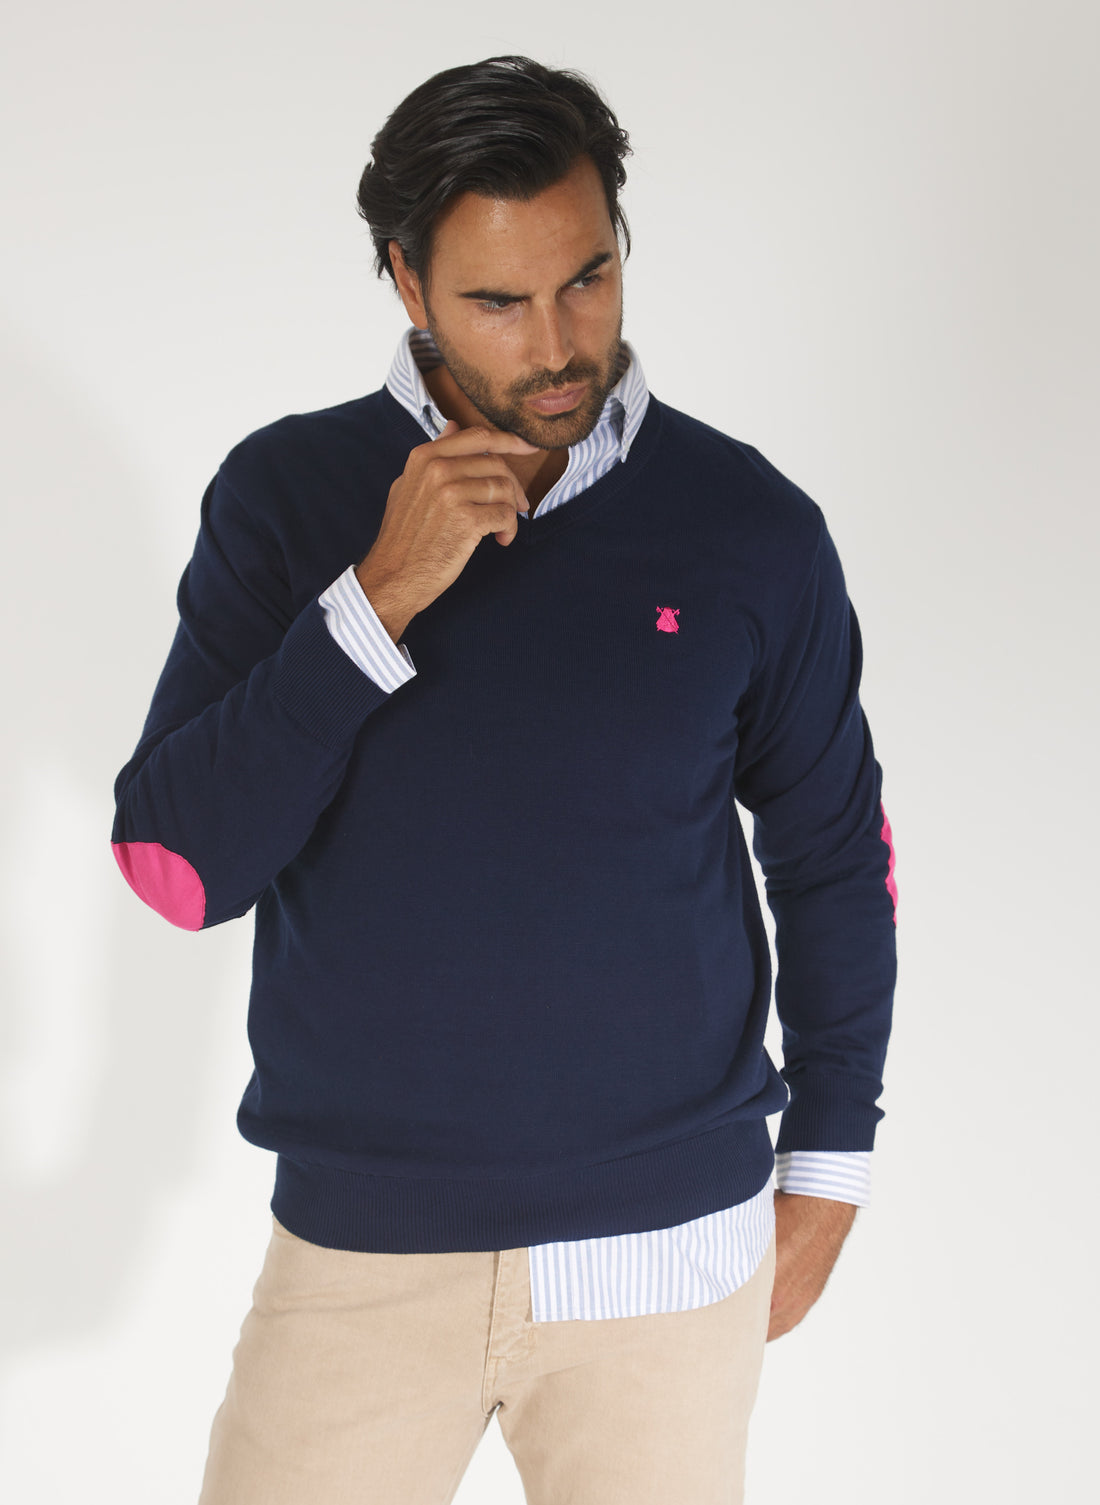 Pull Bleu Marine with Coudières Roses pour Homme